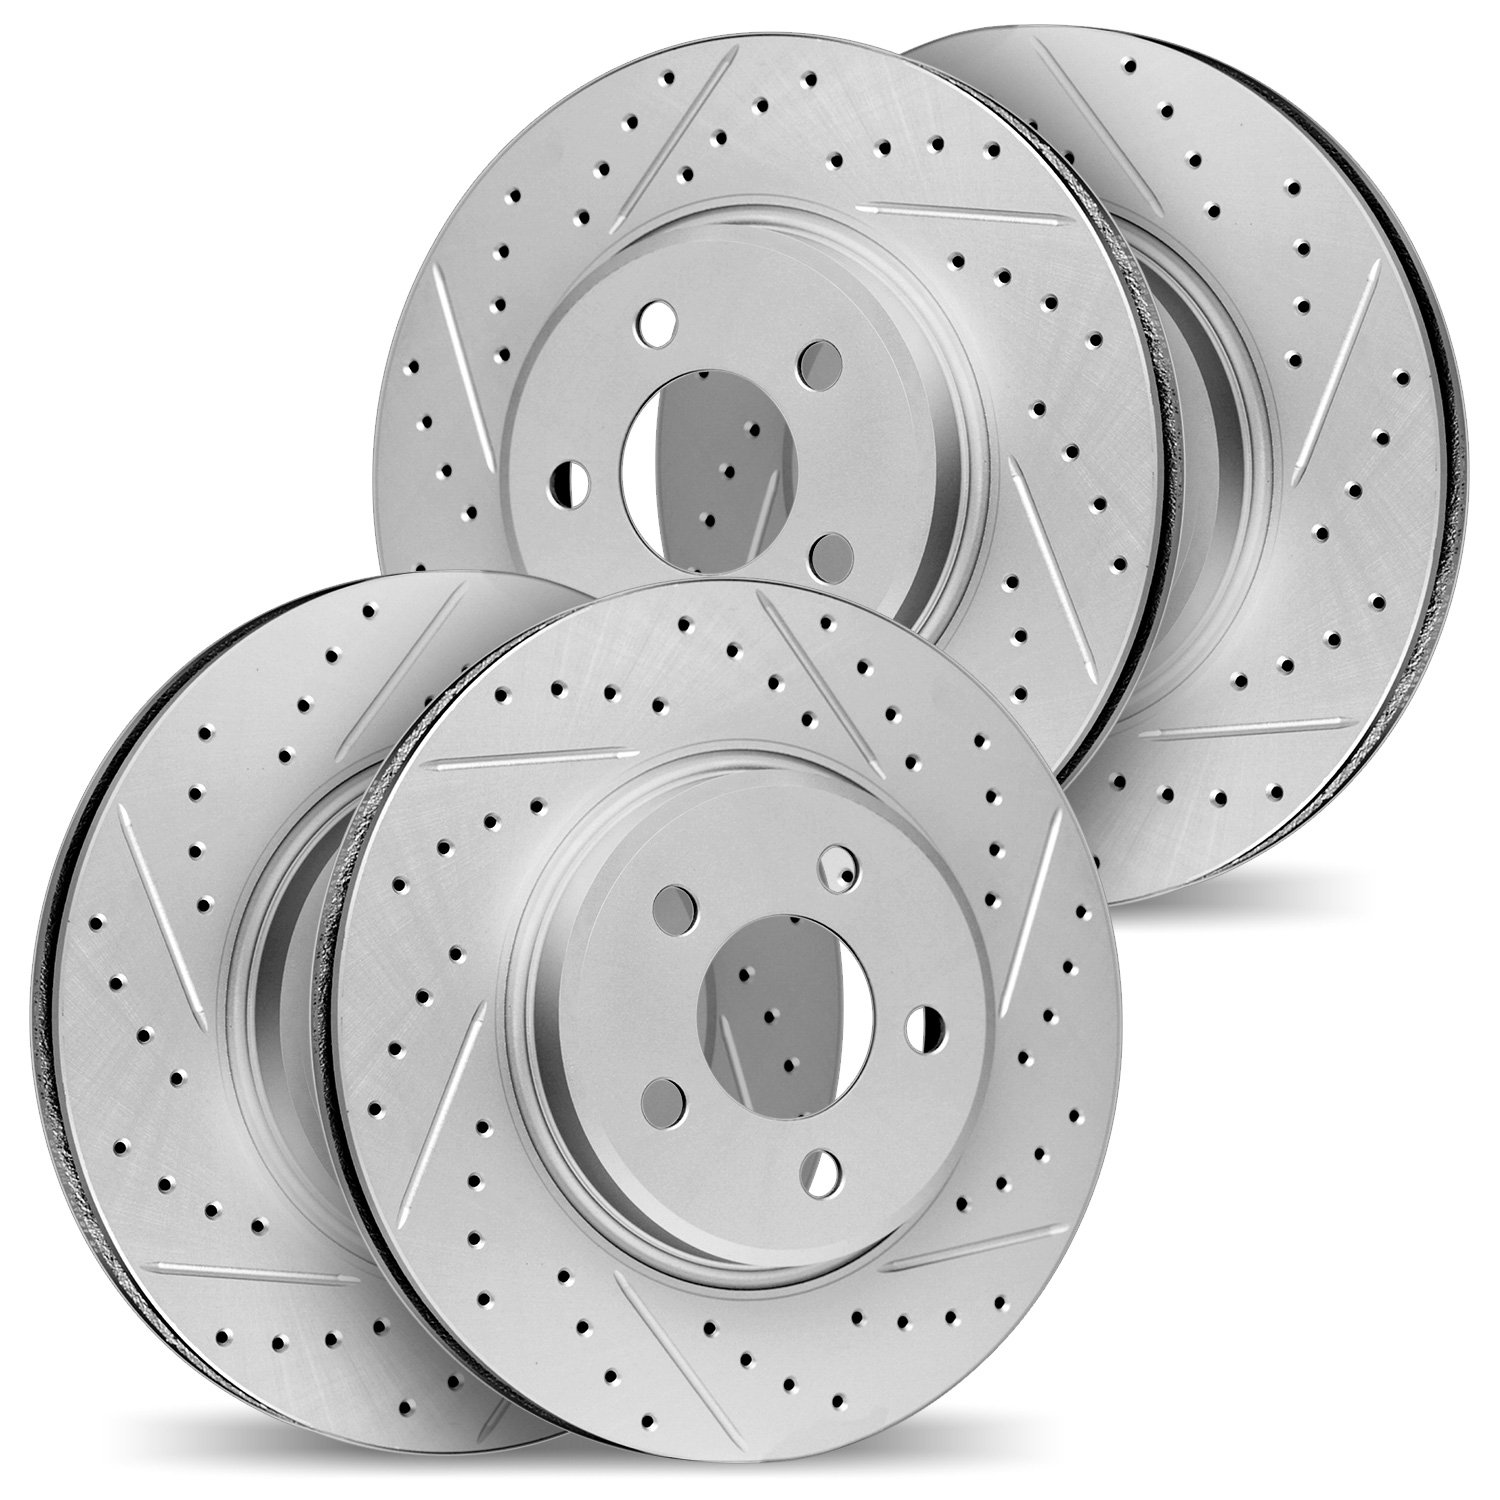 2004-11004 Geoperformance Drilled/Slotted Brake Rotors, 2018-2020 Land Rover, Position: Front and Rear